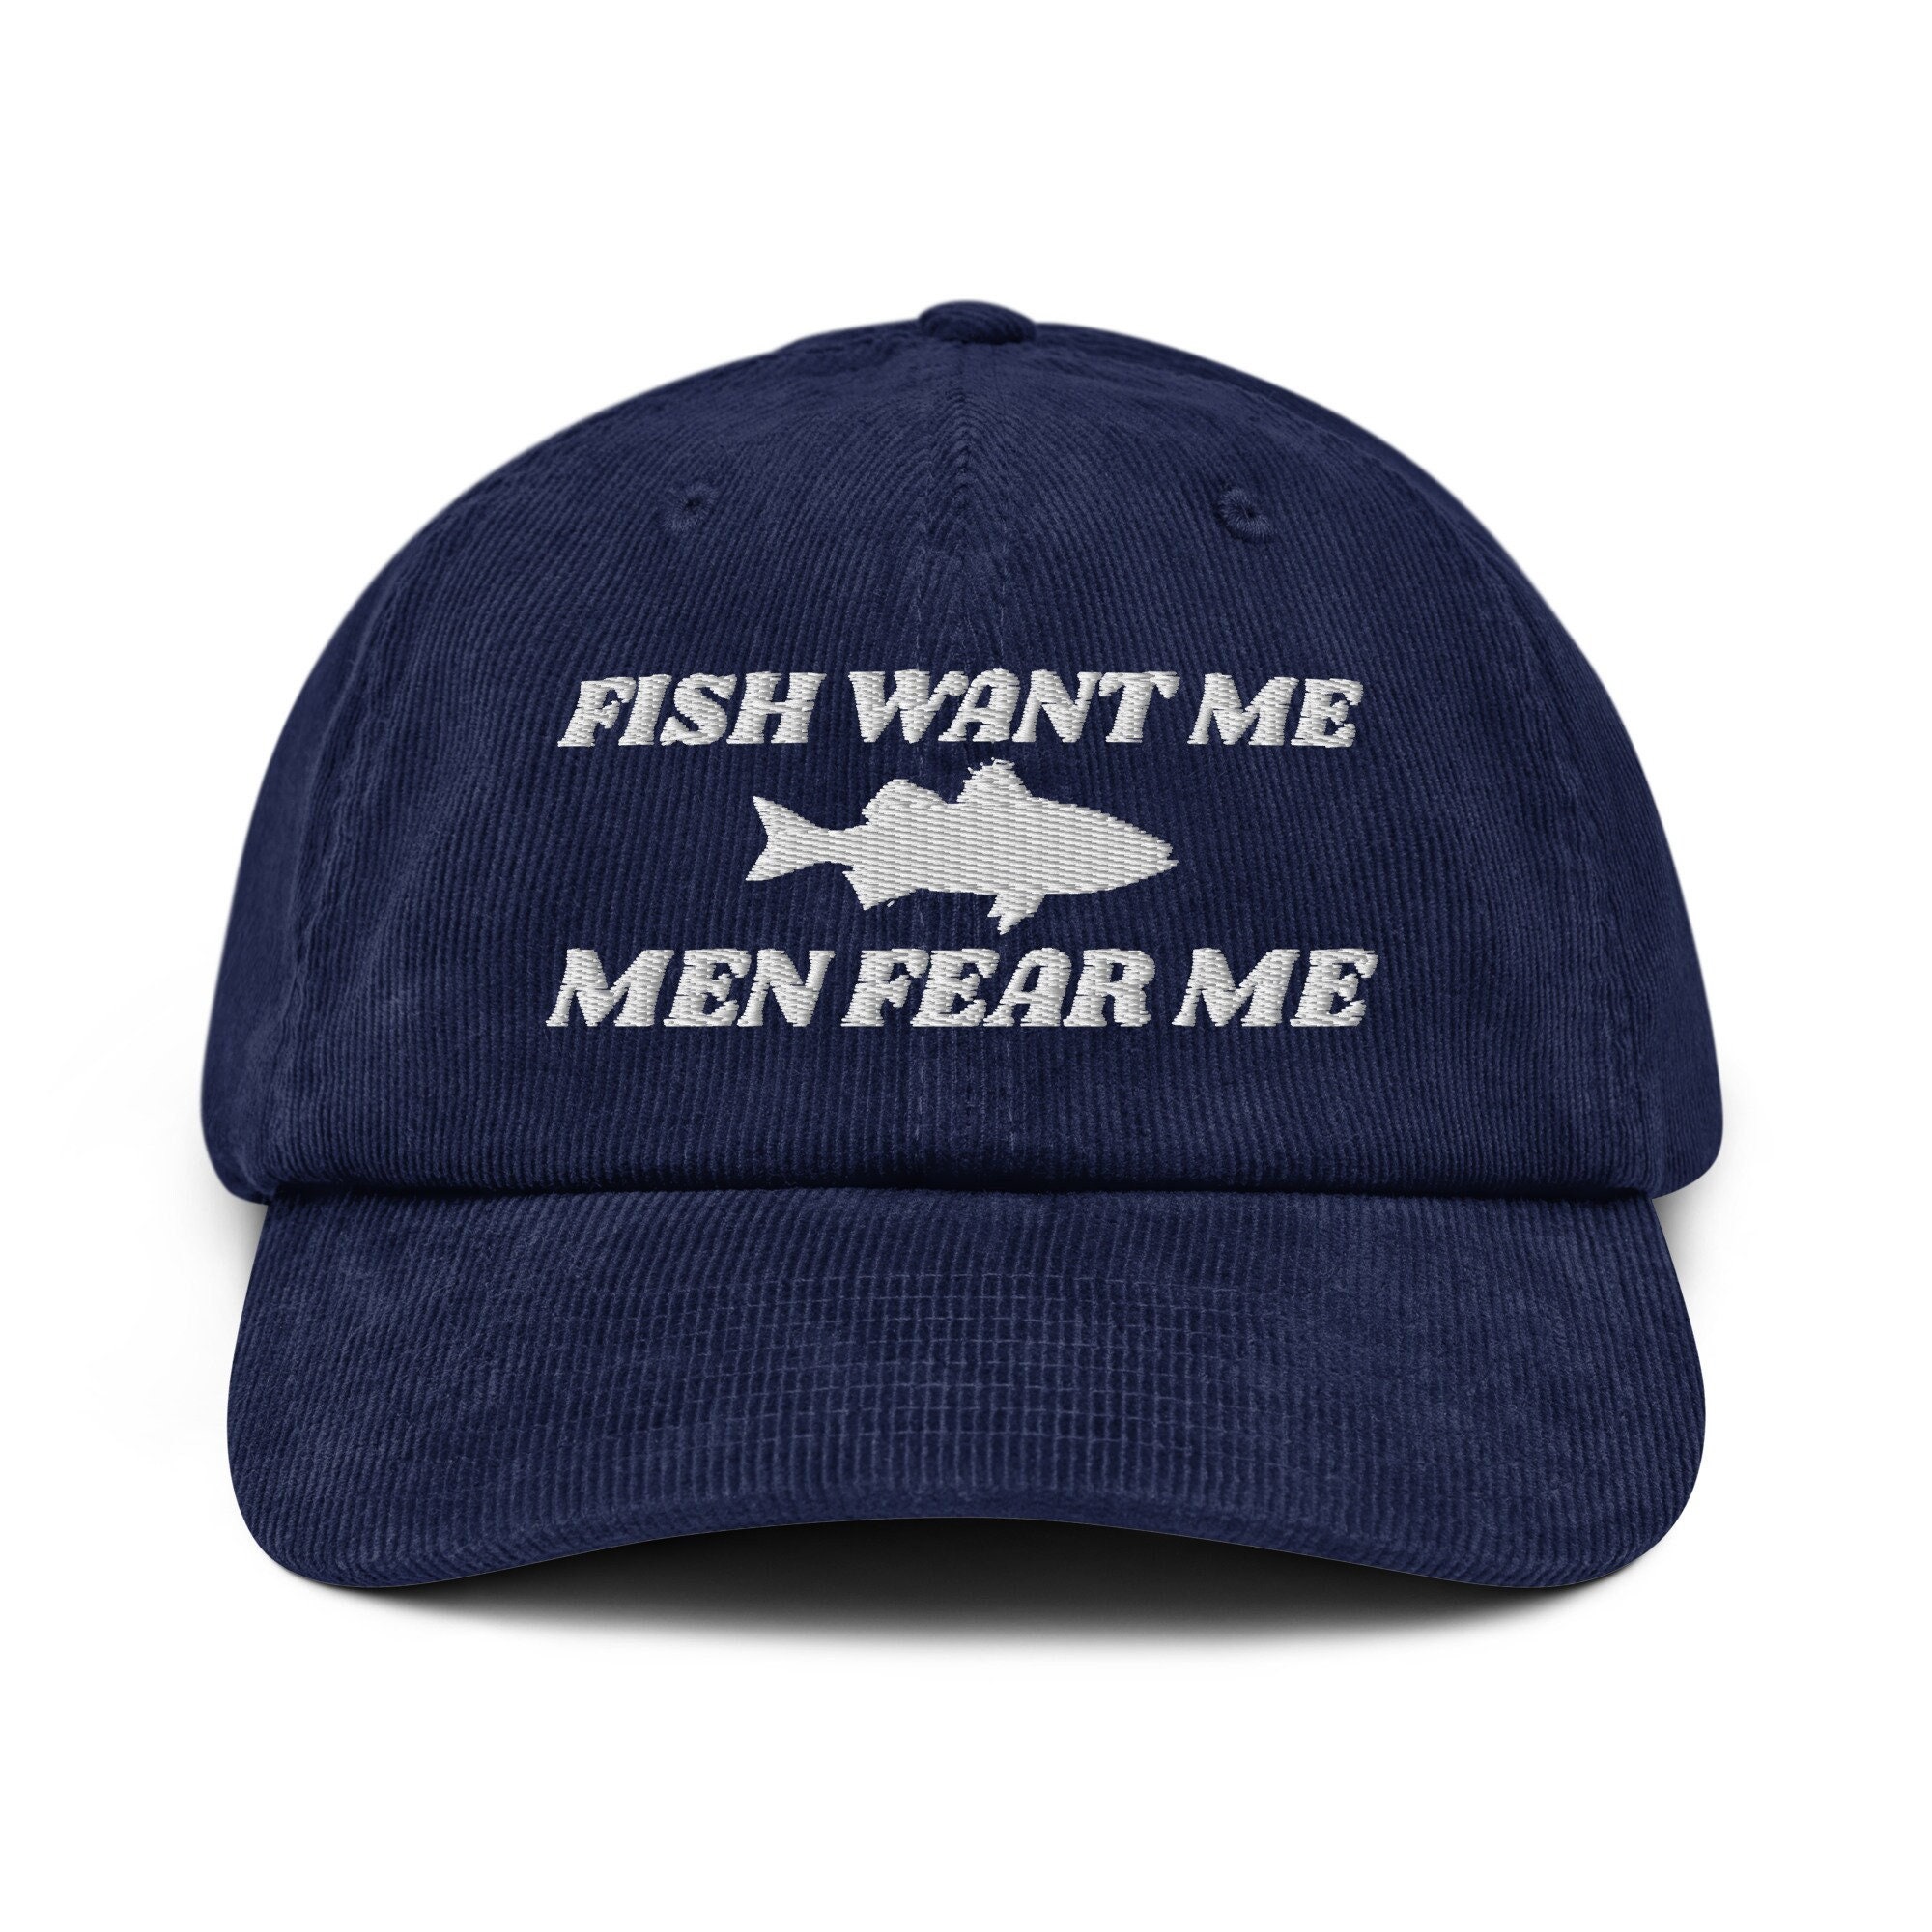 Fish Want Me - Men Fear Me - Embroidered Funny Fishing Lovers Corduroy Hat Cap